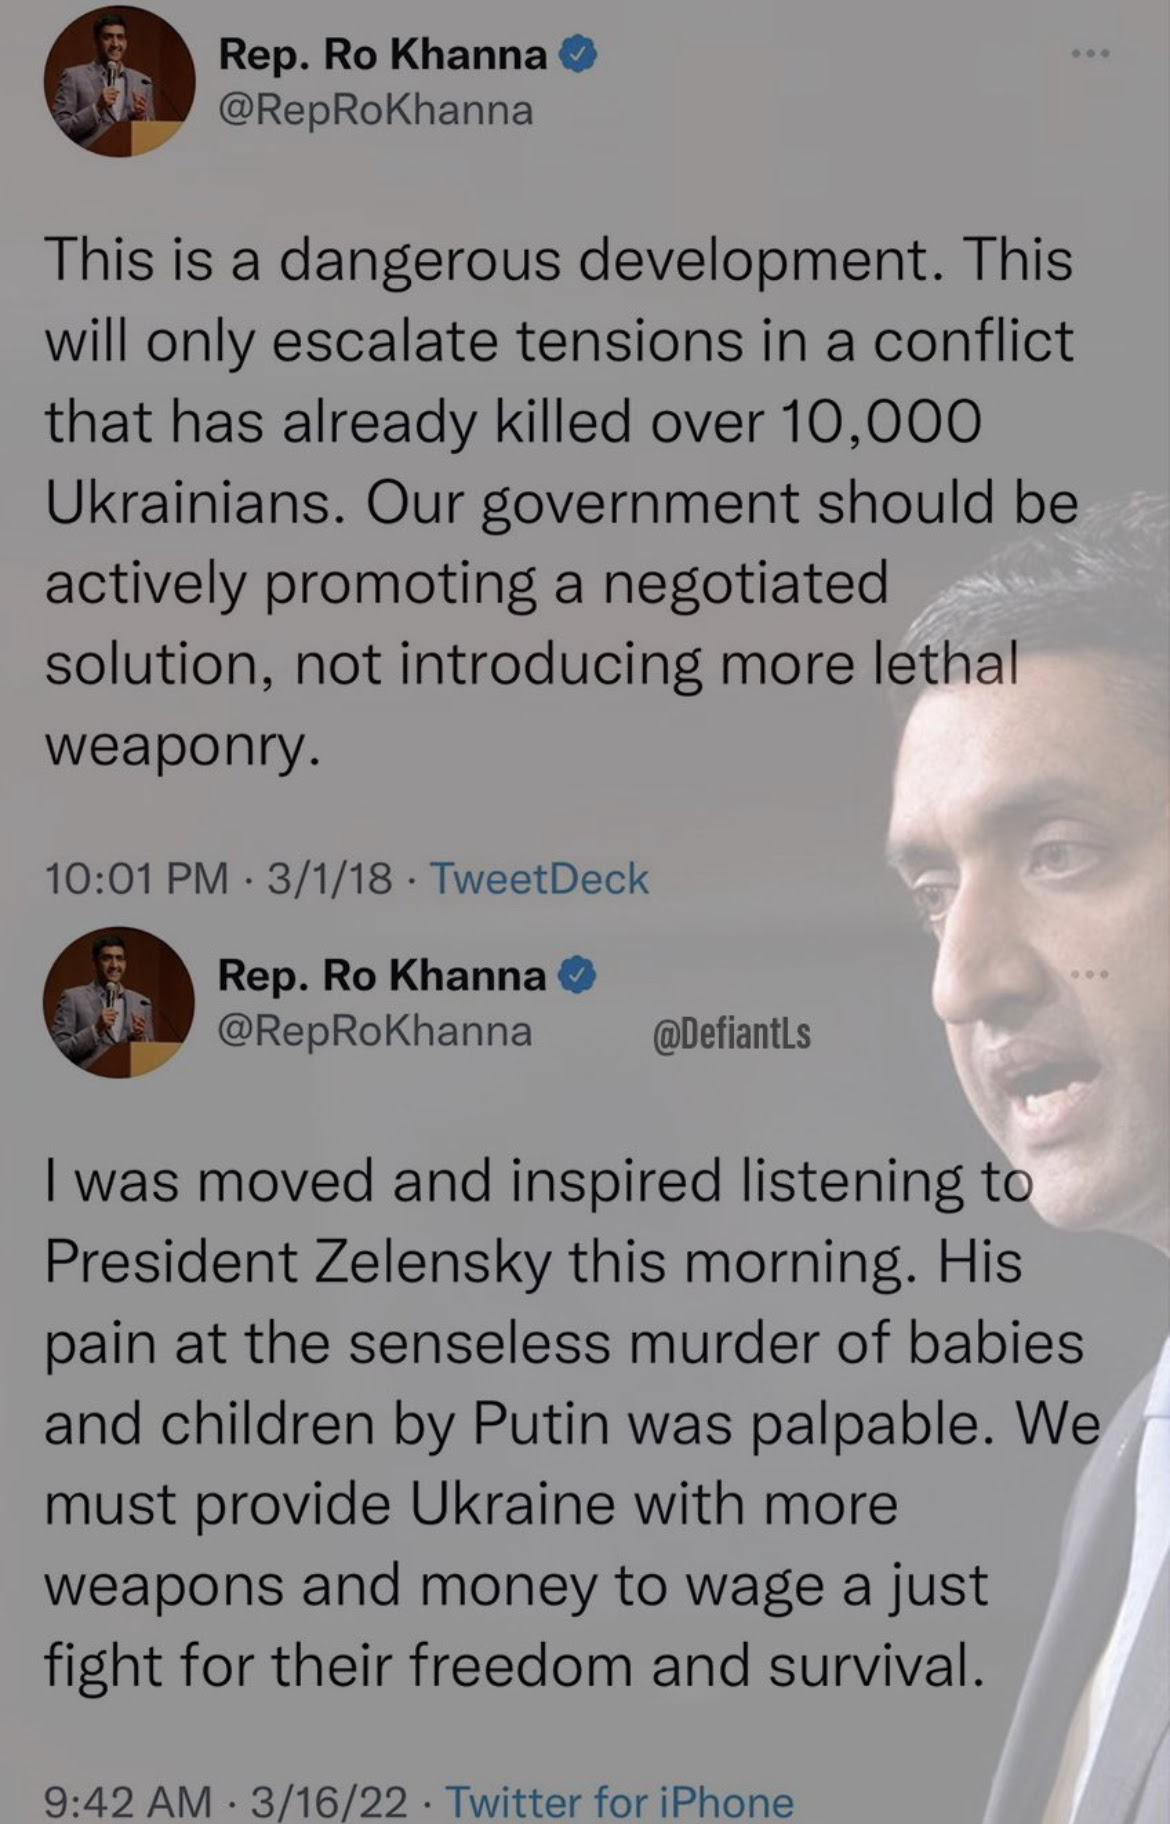 Hypocrite Ro Khanna purports to be anti-War then goes all in for throwing more weaponry to Ukrain.